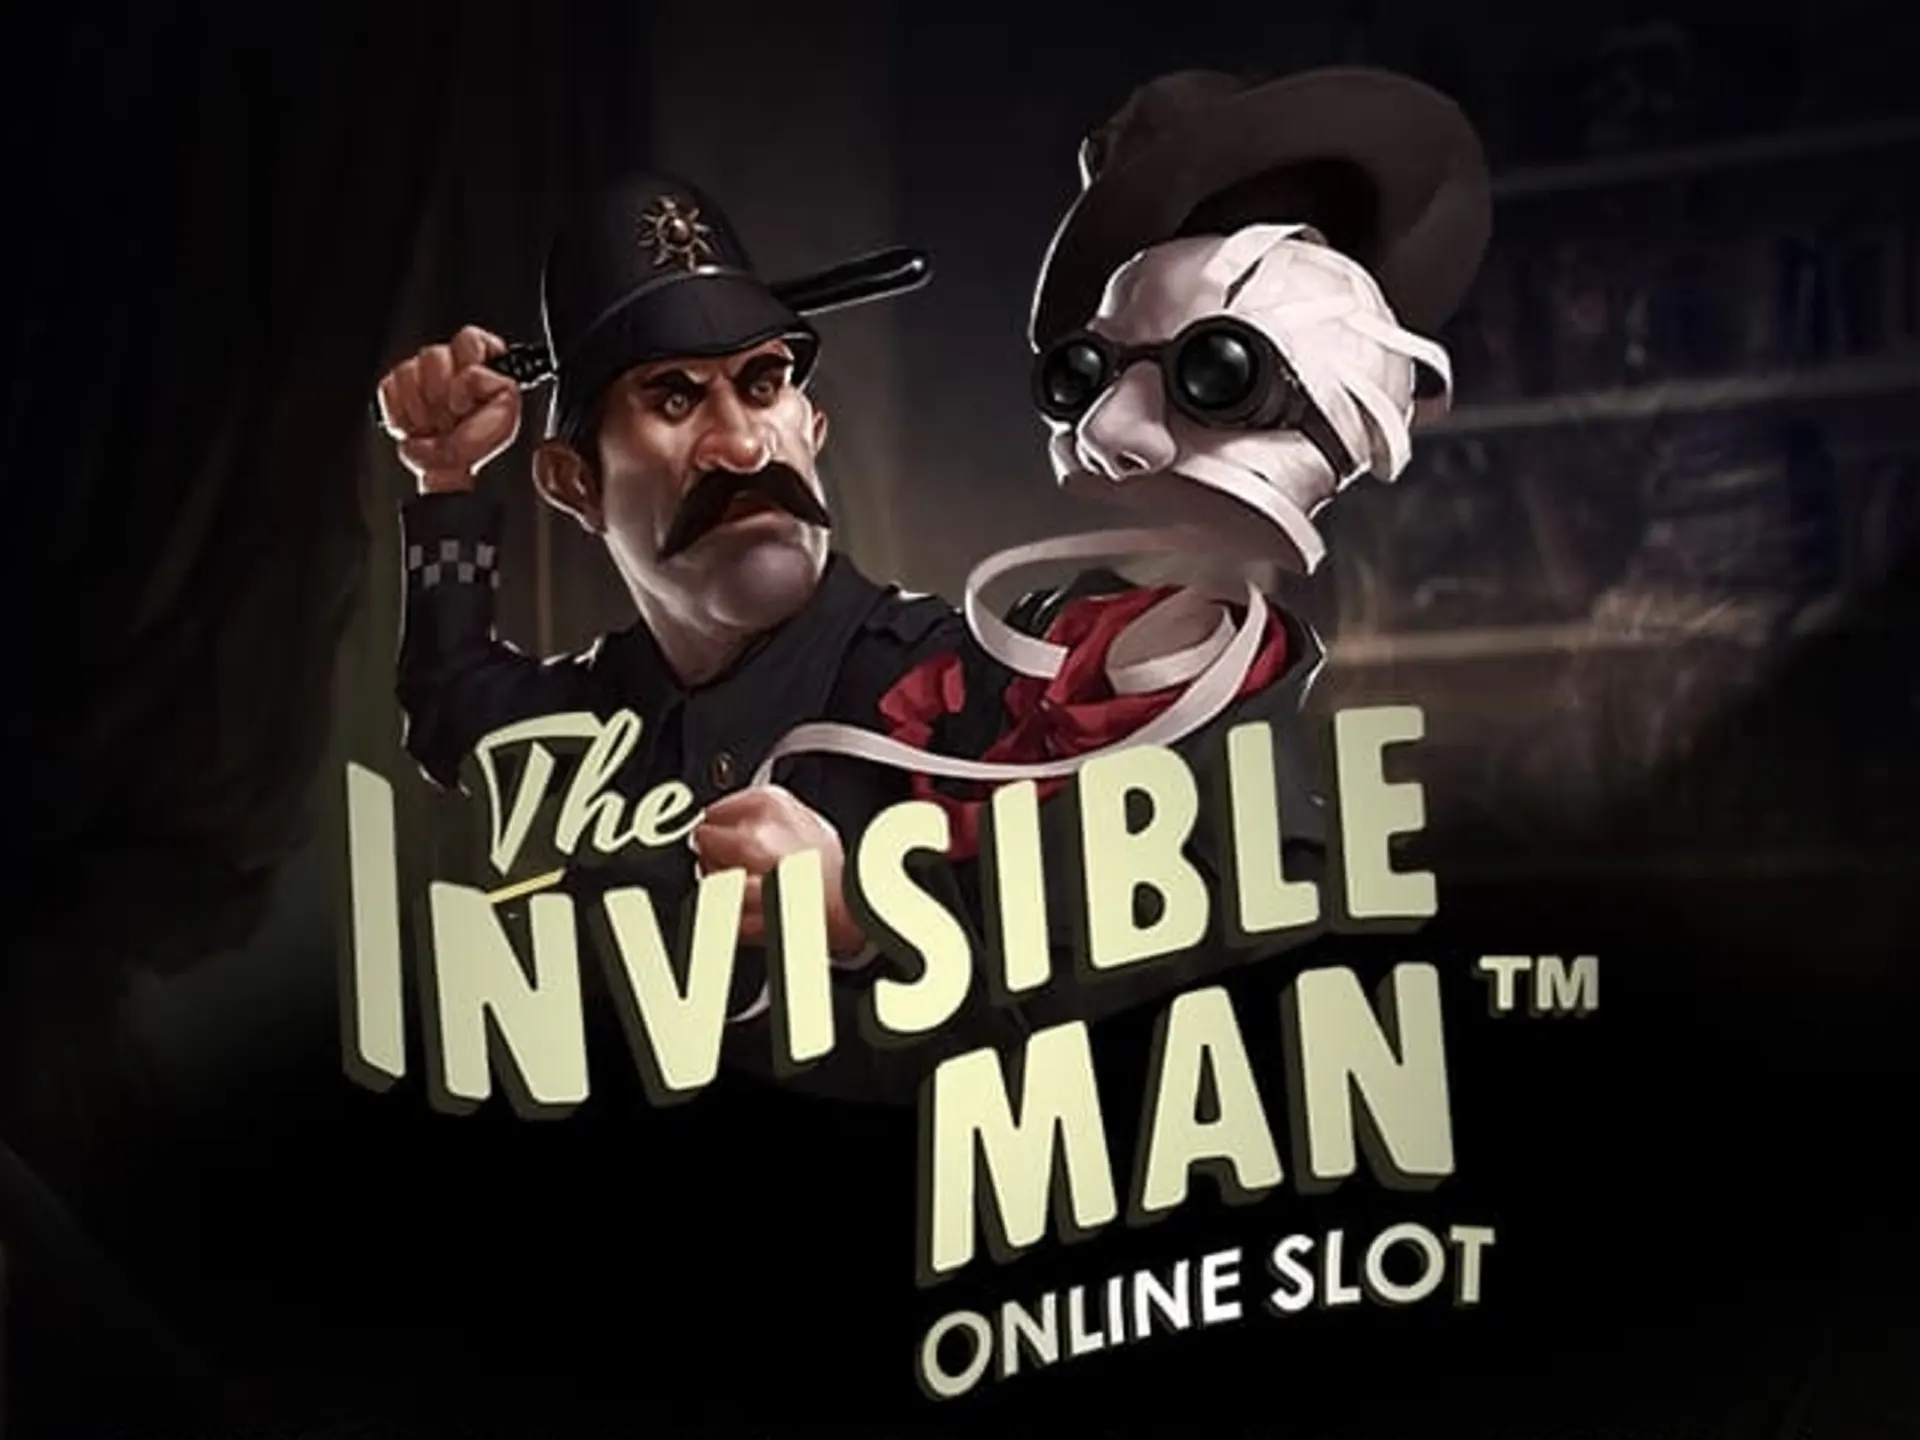 Win a lot of money with the mystery of Invisible Man.